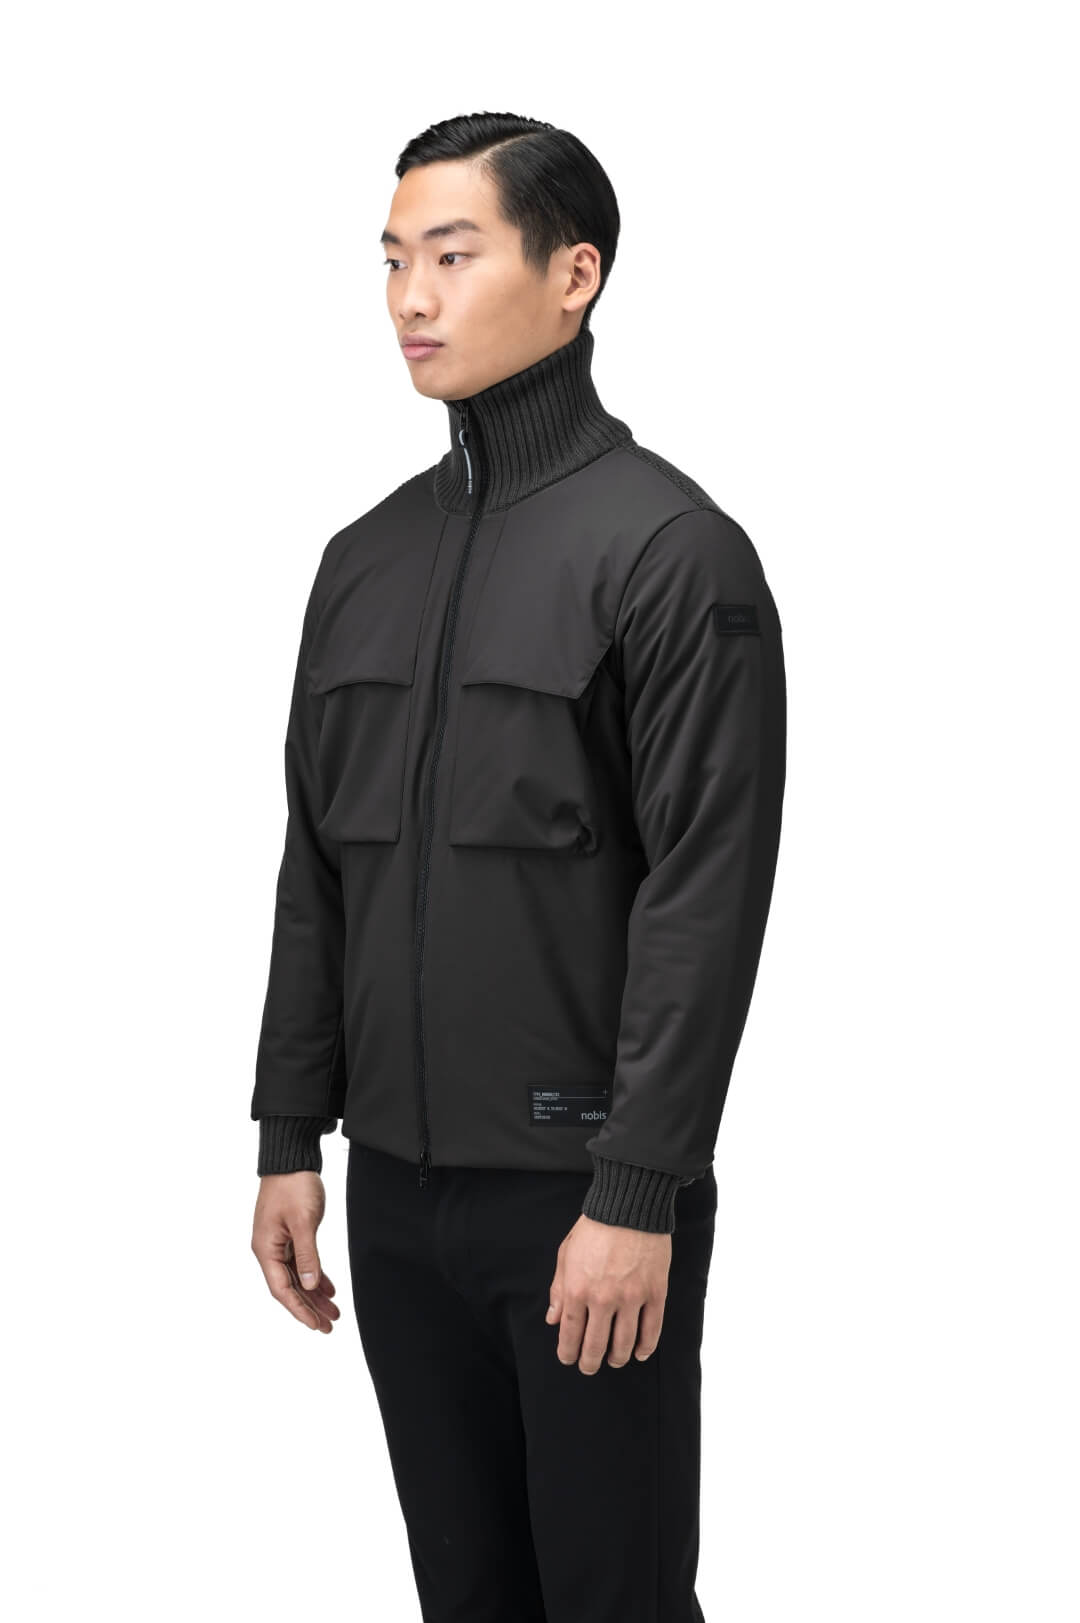 Layton Men's Tactical Hybrid Sweater in hip length, Primaloft Gold Insulation Active+, Merion wool knit collar, sleeves, back, and cuffs, two-way front zipper, and pockets at chest and waist, in Black